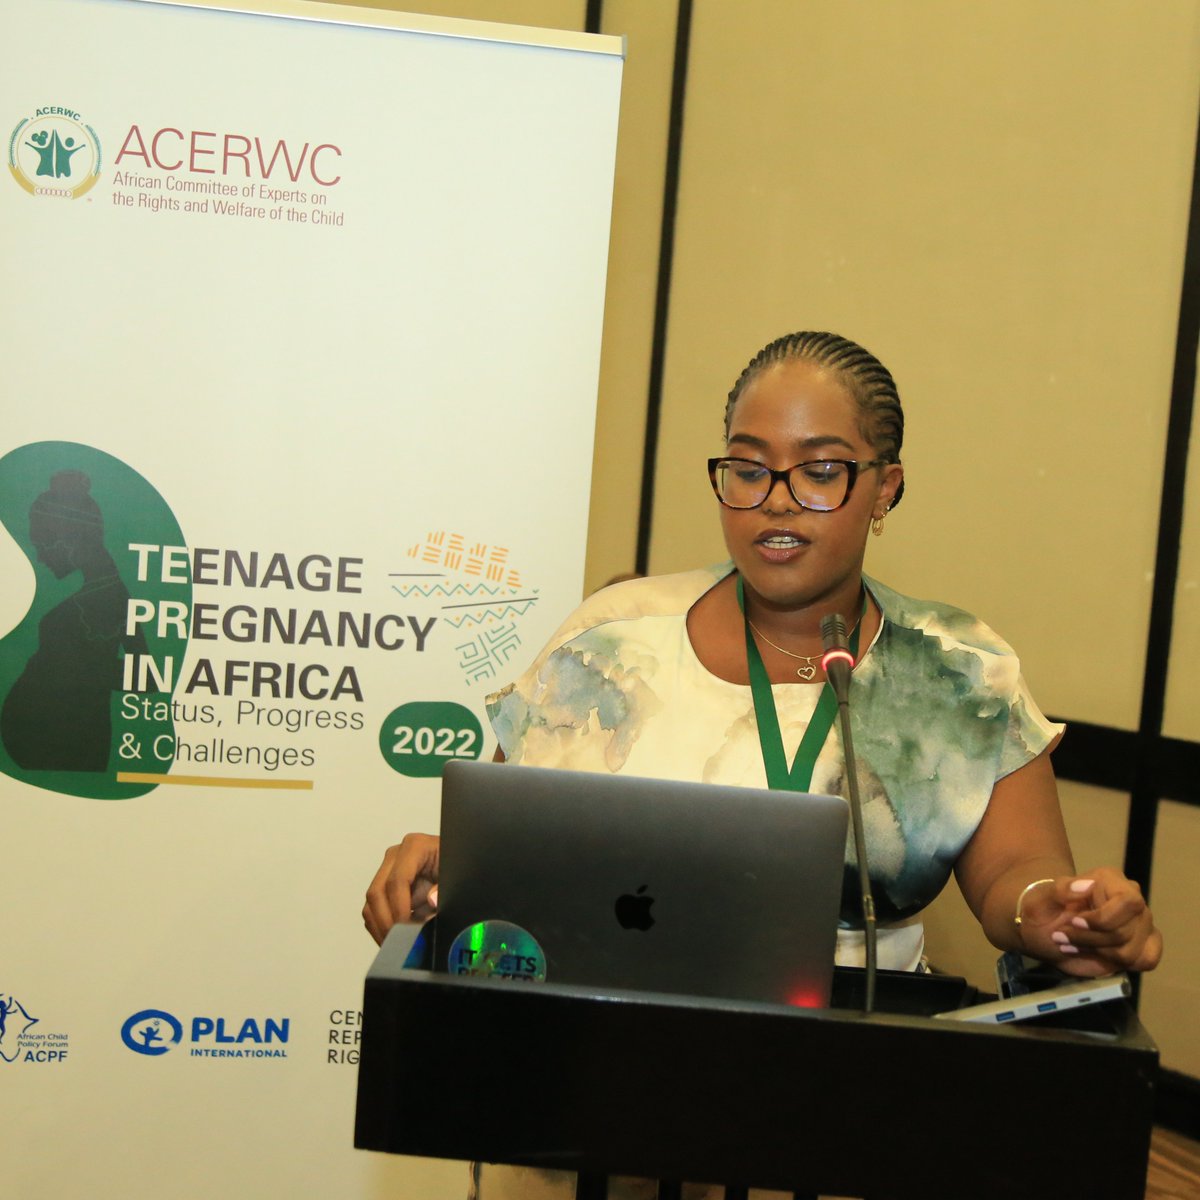 Findings of the Study on Teenage Pregnancy in Africa: '25% of all teenagers in 24 African countries are experiencing pregnancy. This statistic manifests into a more concerning fact: 1 in every 5 adolescent girls in Africa becomes a mother before turning 19.' #ACERWC43